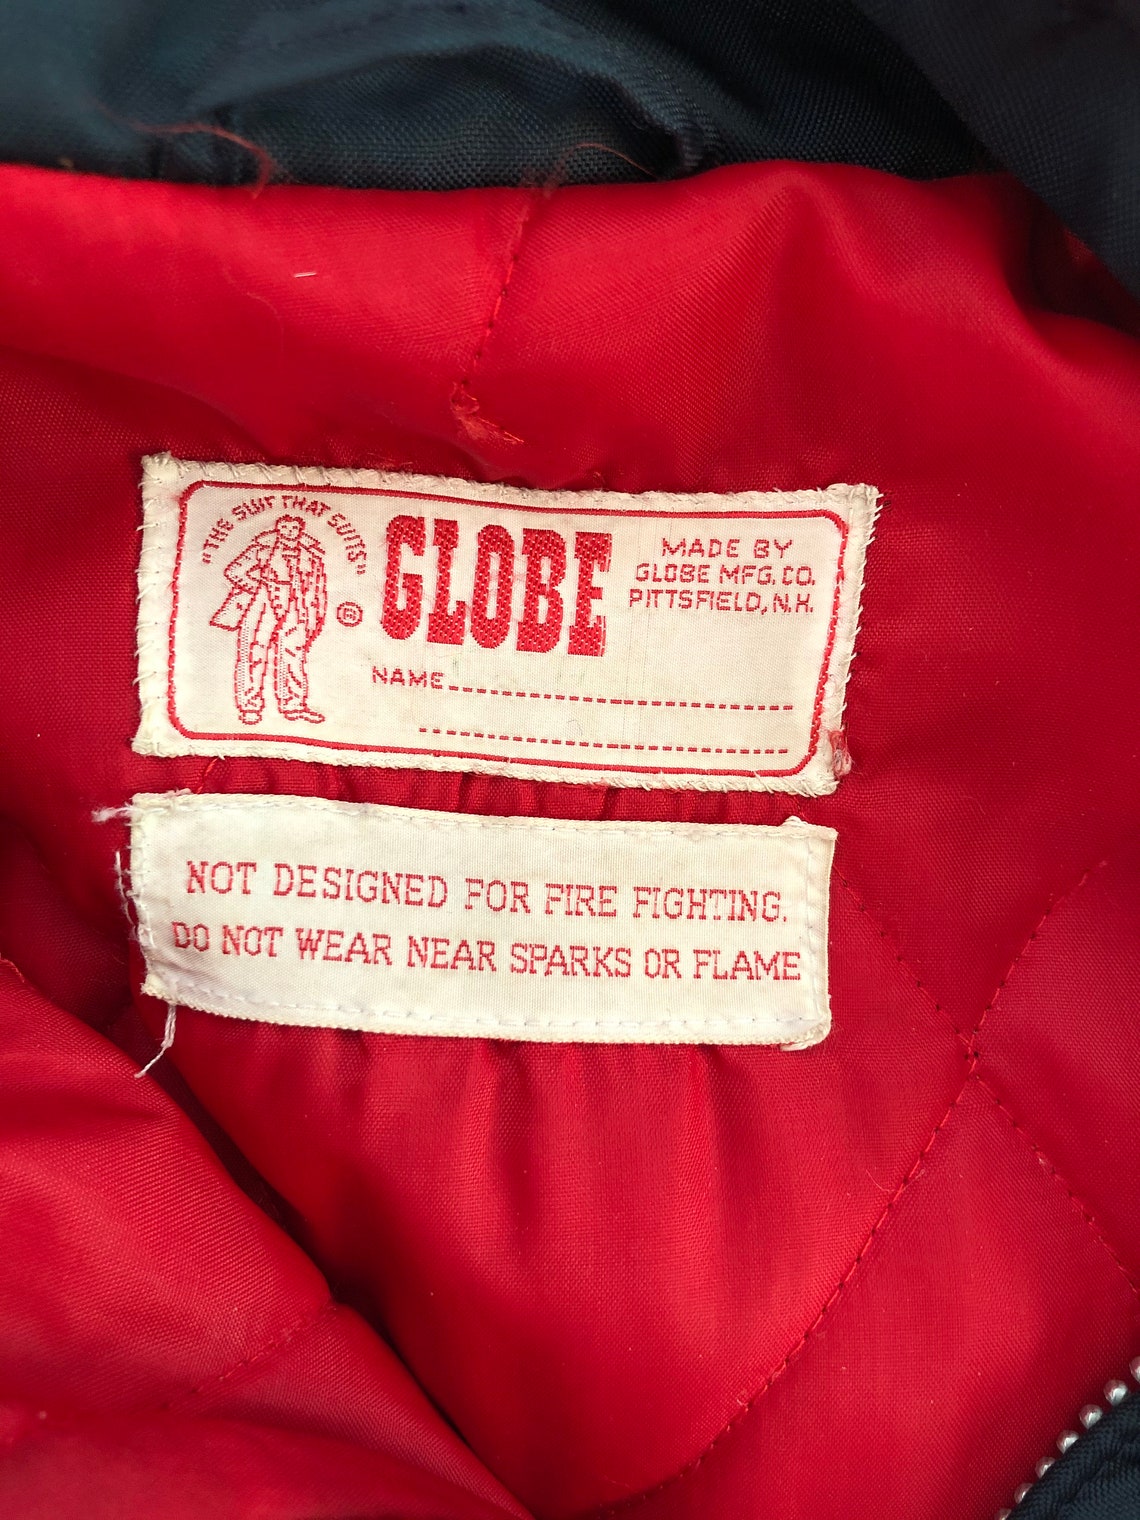 Rare vintage Globe long firefighter jacket collectors items | Etsy